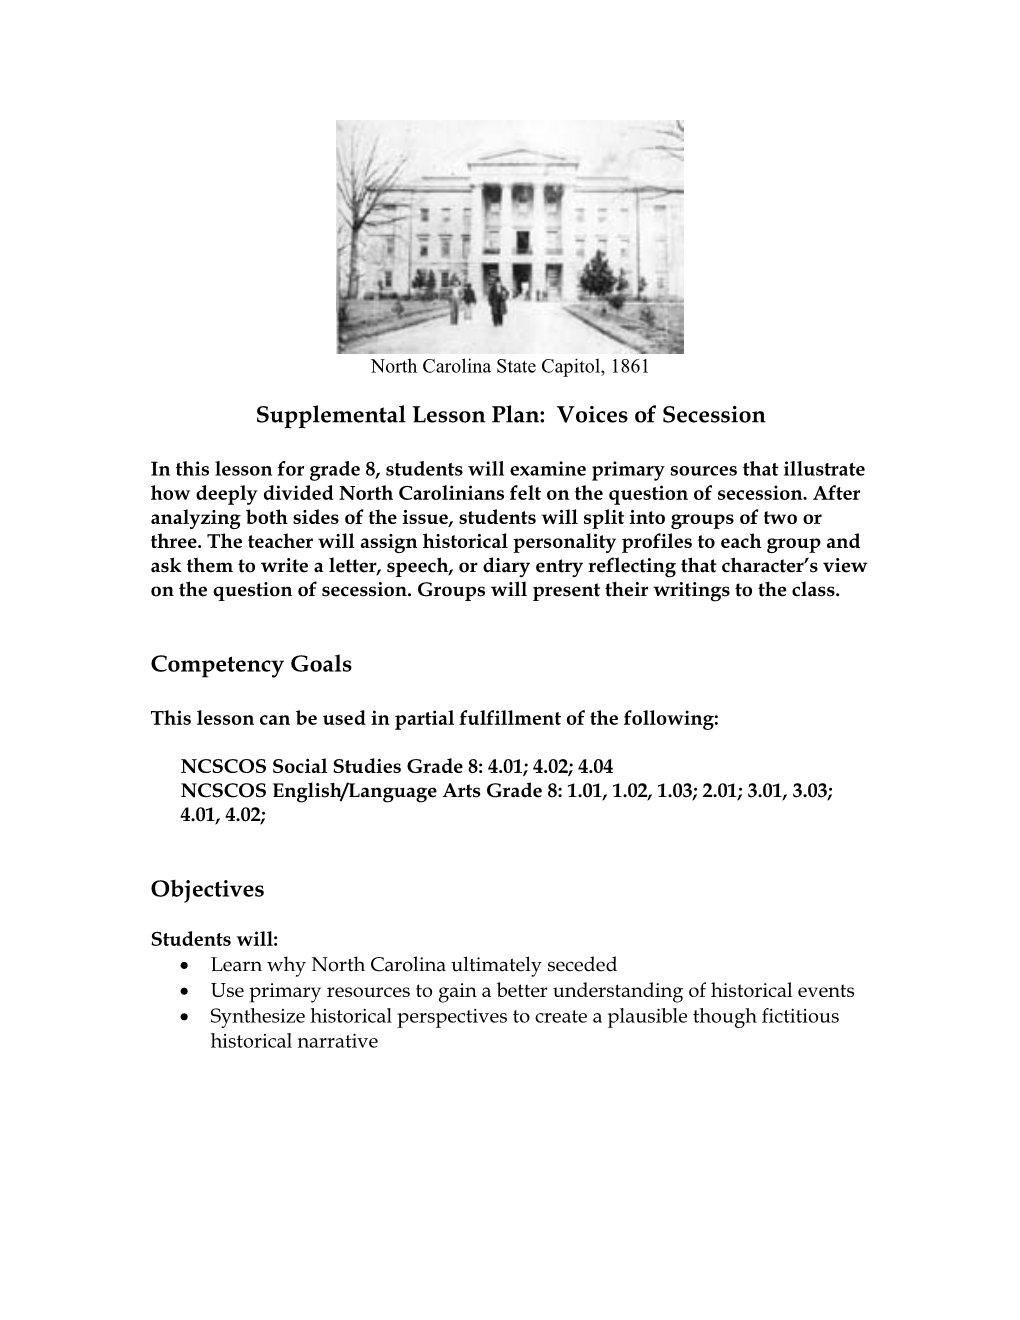 Supplemental Lesson Plan: Voices of Secession Competency Goals